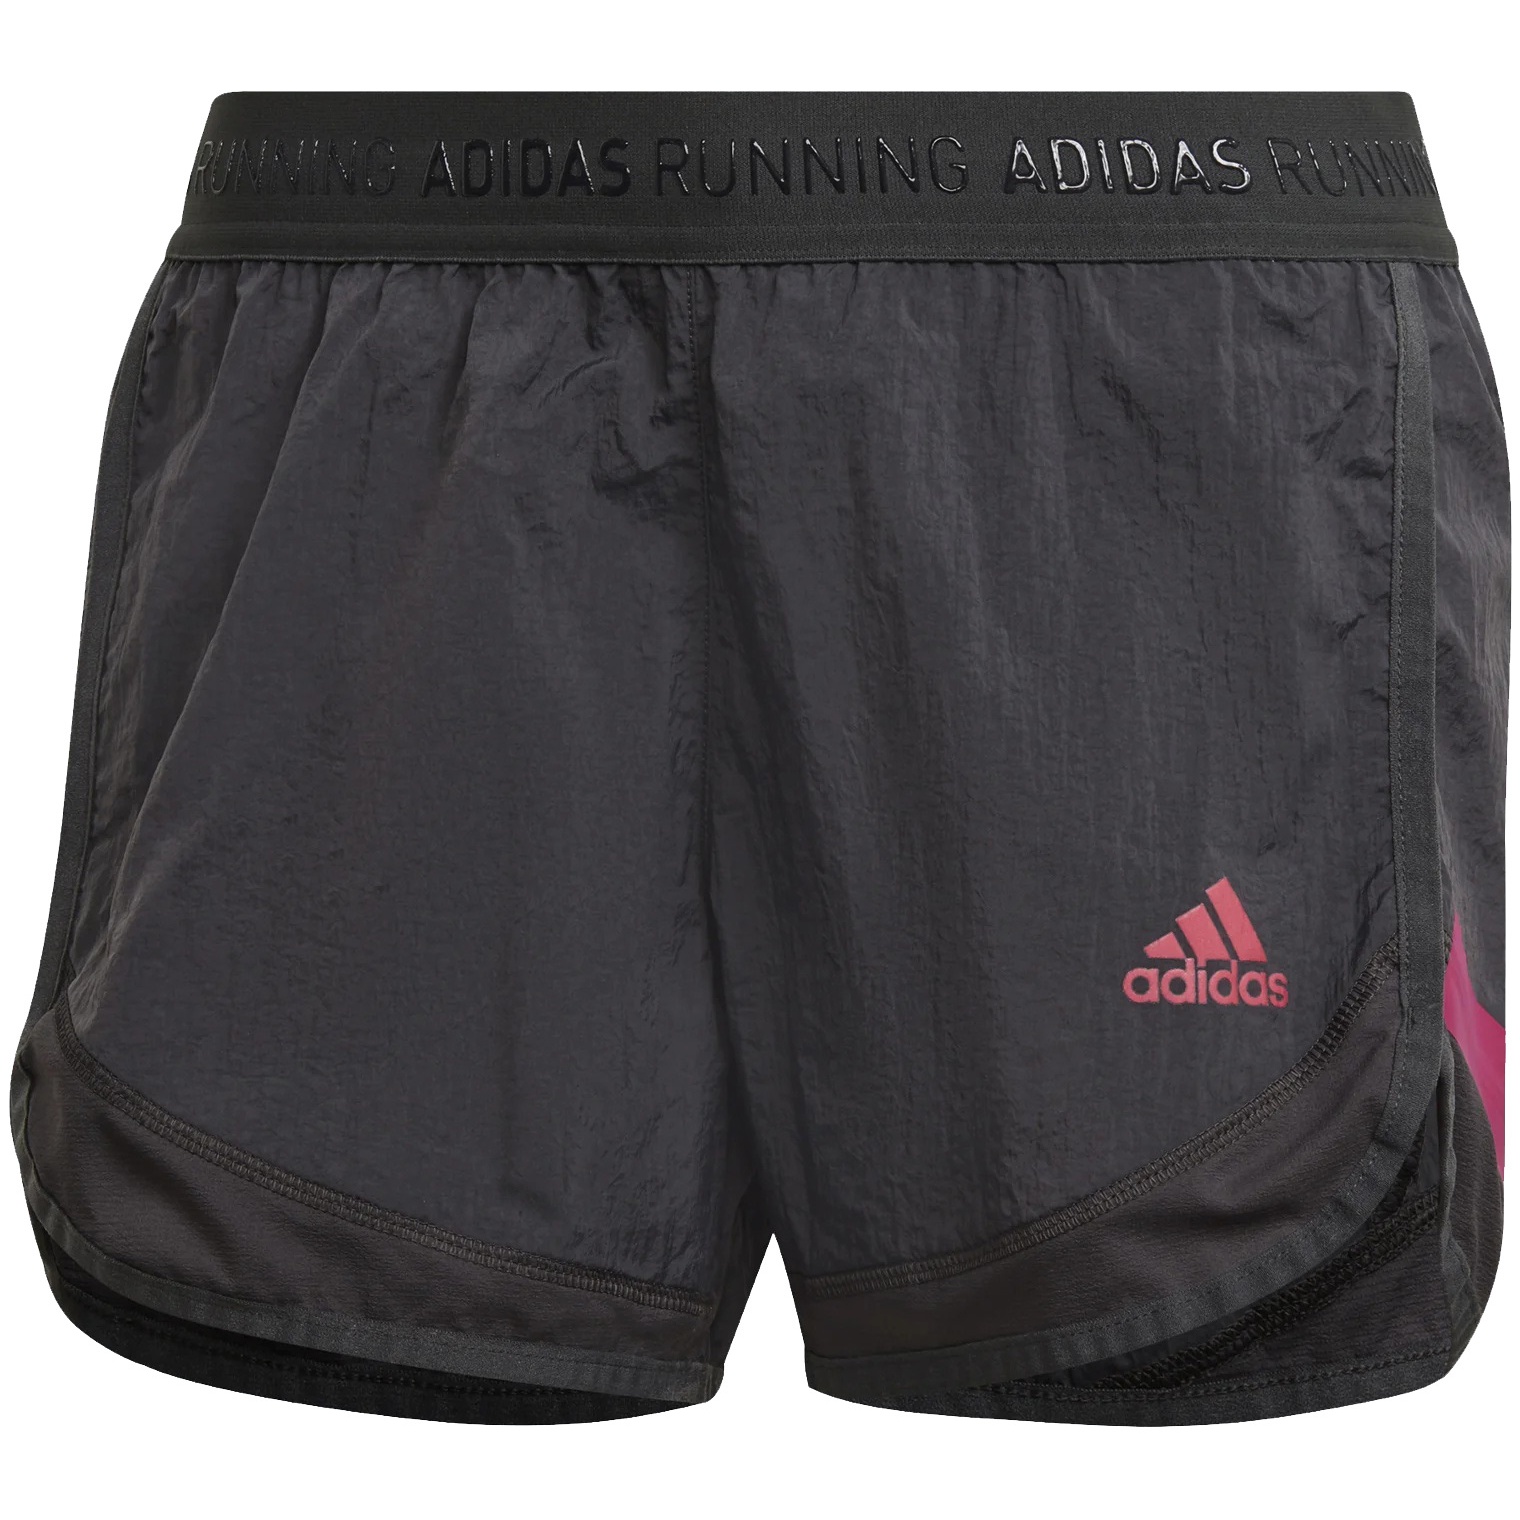 Image of adidas Women's Ultra Shorts - 3" - dgh solid grey/wild pink GK3756